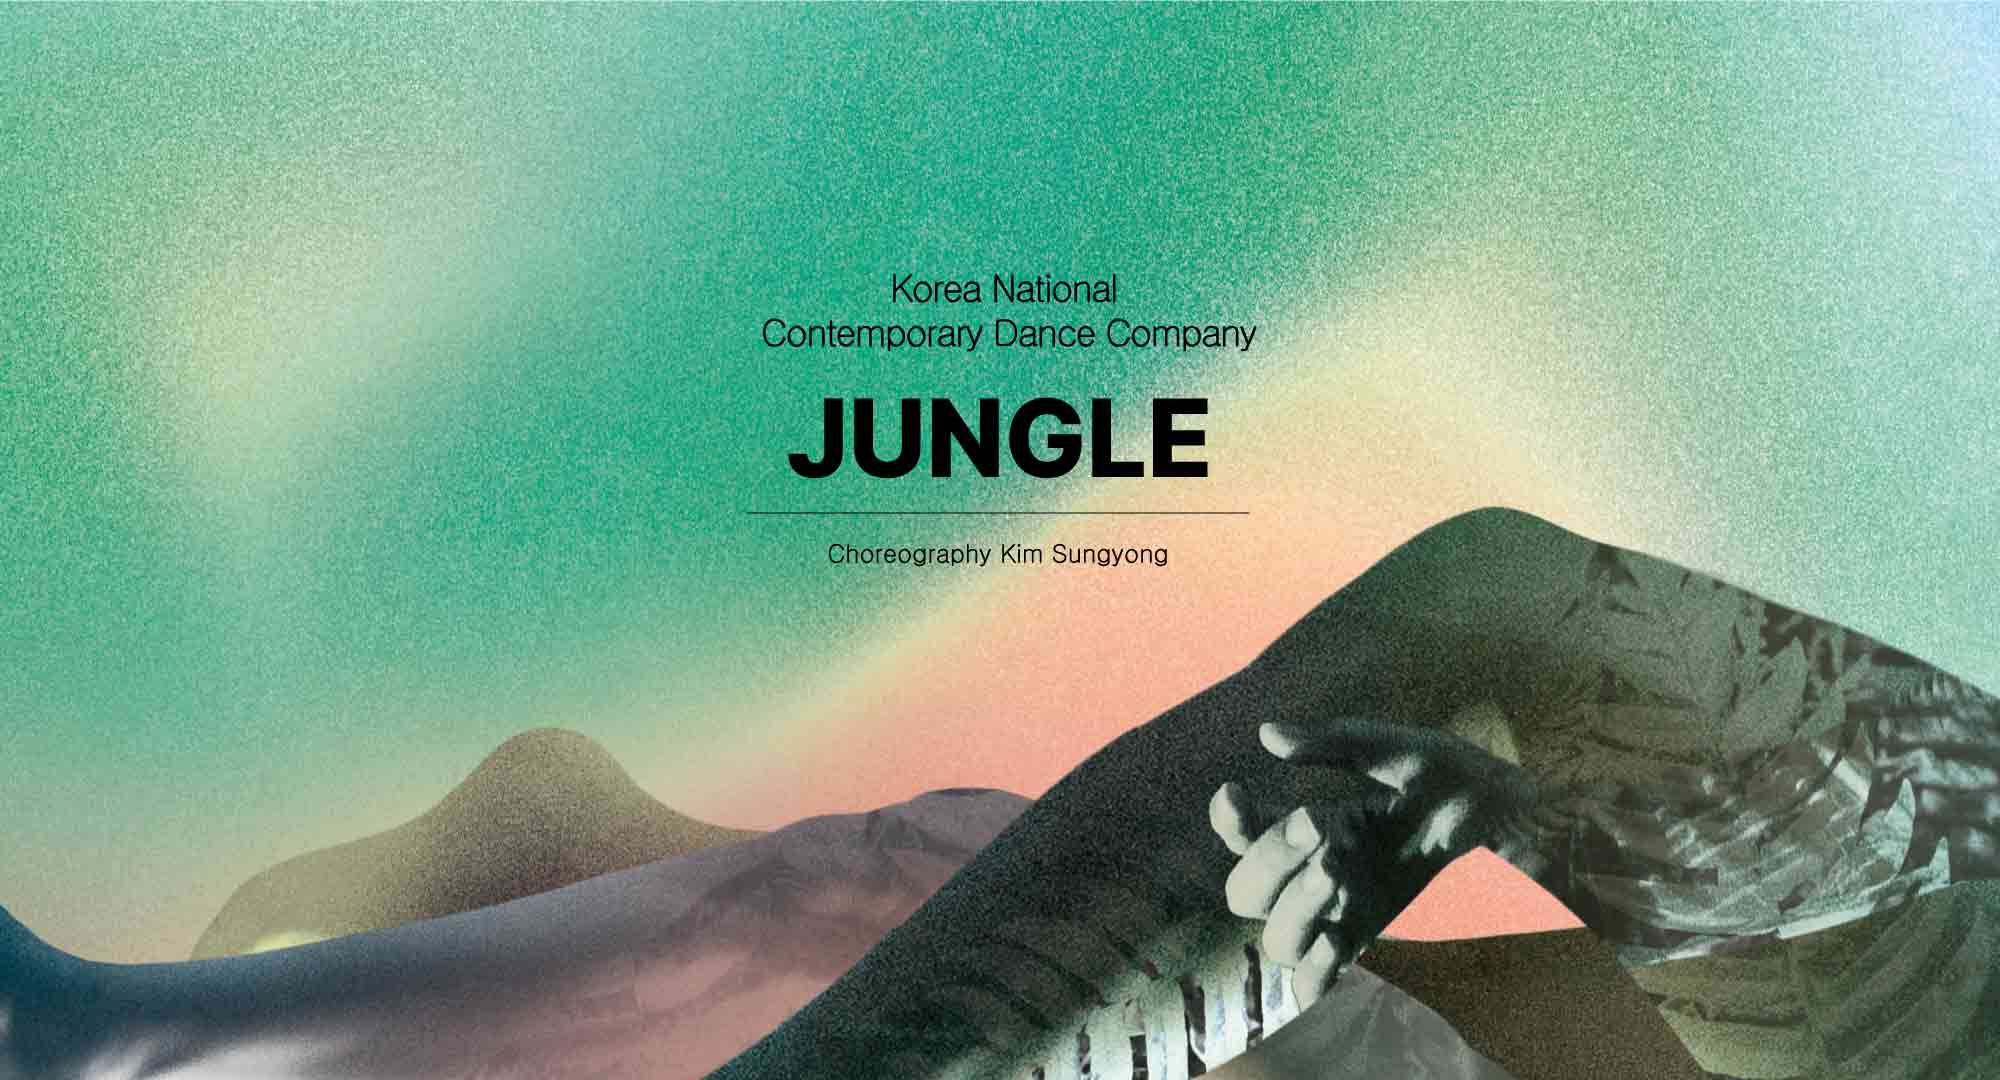 KNCDC `Jungle` (poster)